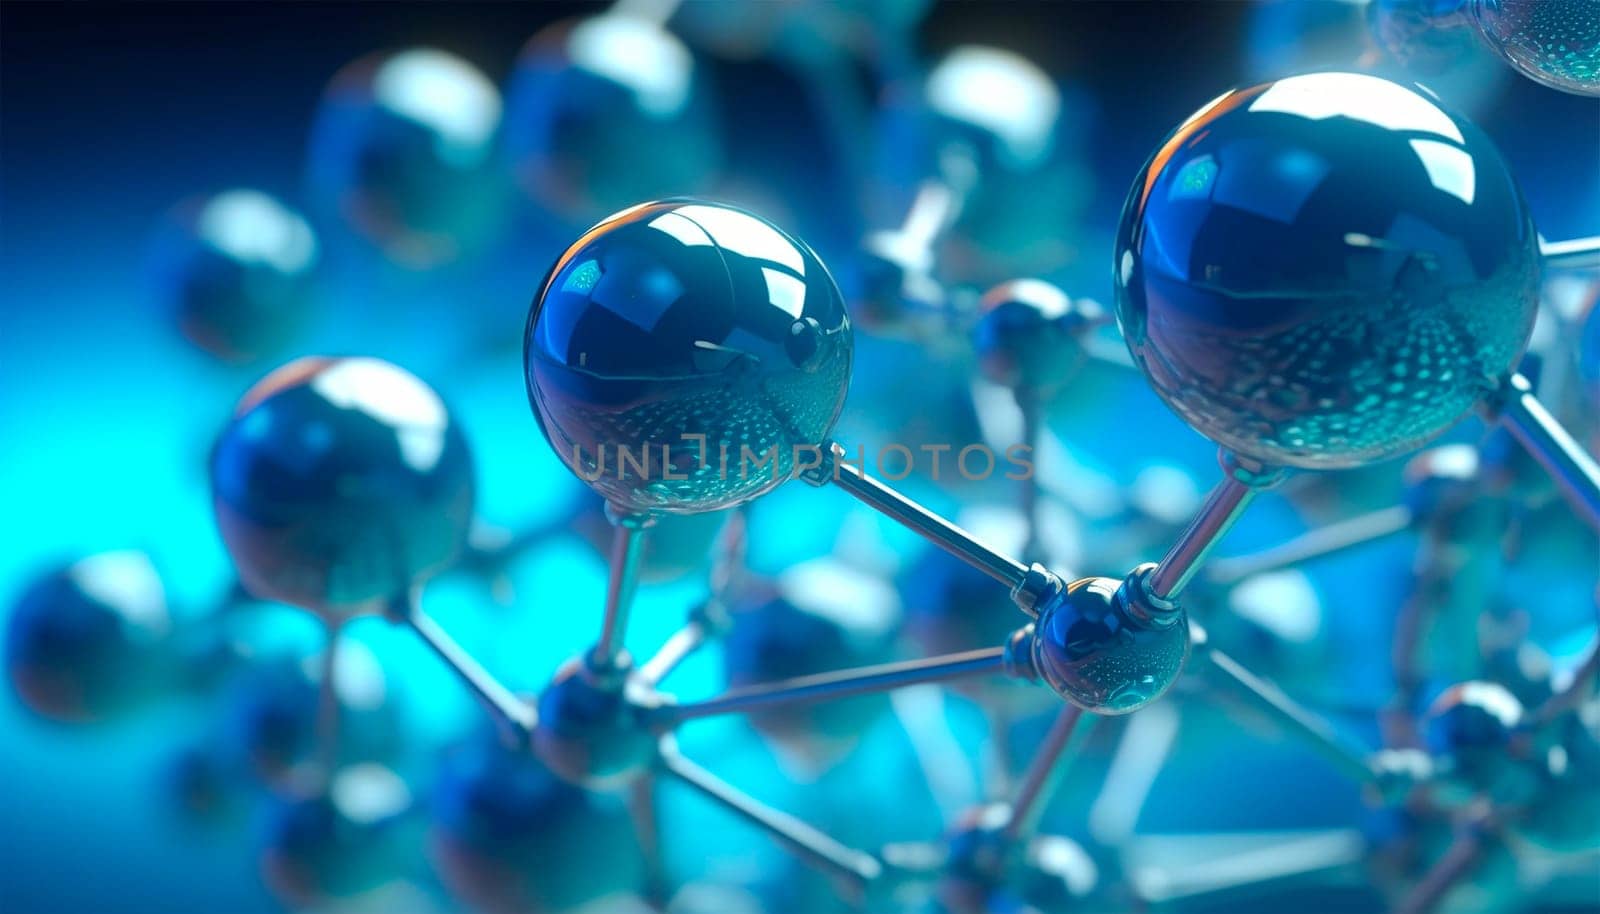 Science background with molecule or atom. molecule set, jojoba nano 3D cell, collagen bio abstract medical icon. Beauty science skin care molecular concept, natural bubble kit. colorful molecule atom illustration Copy space